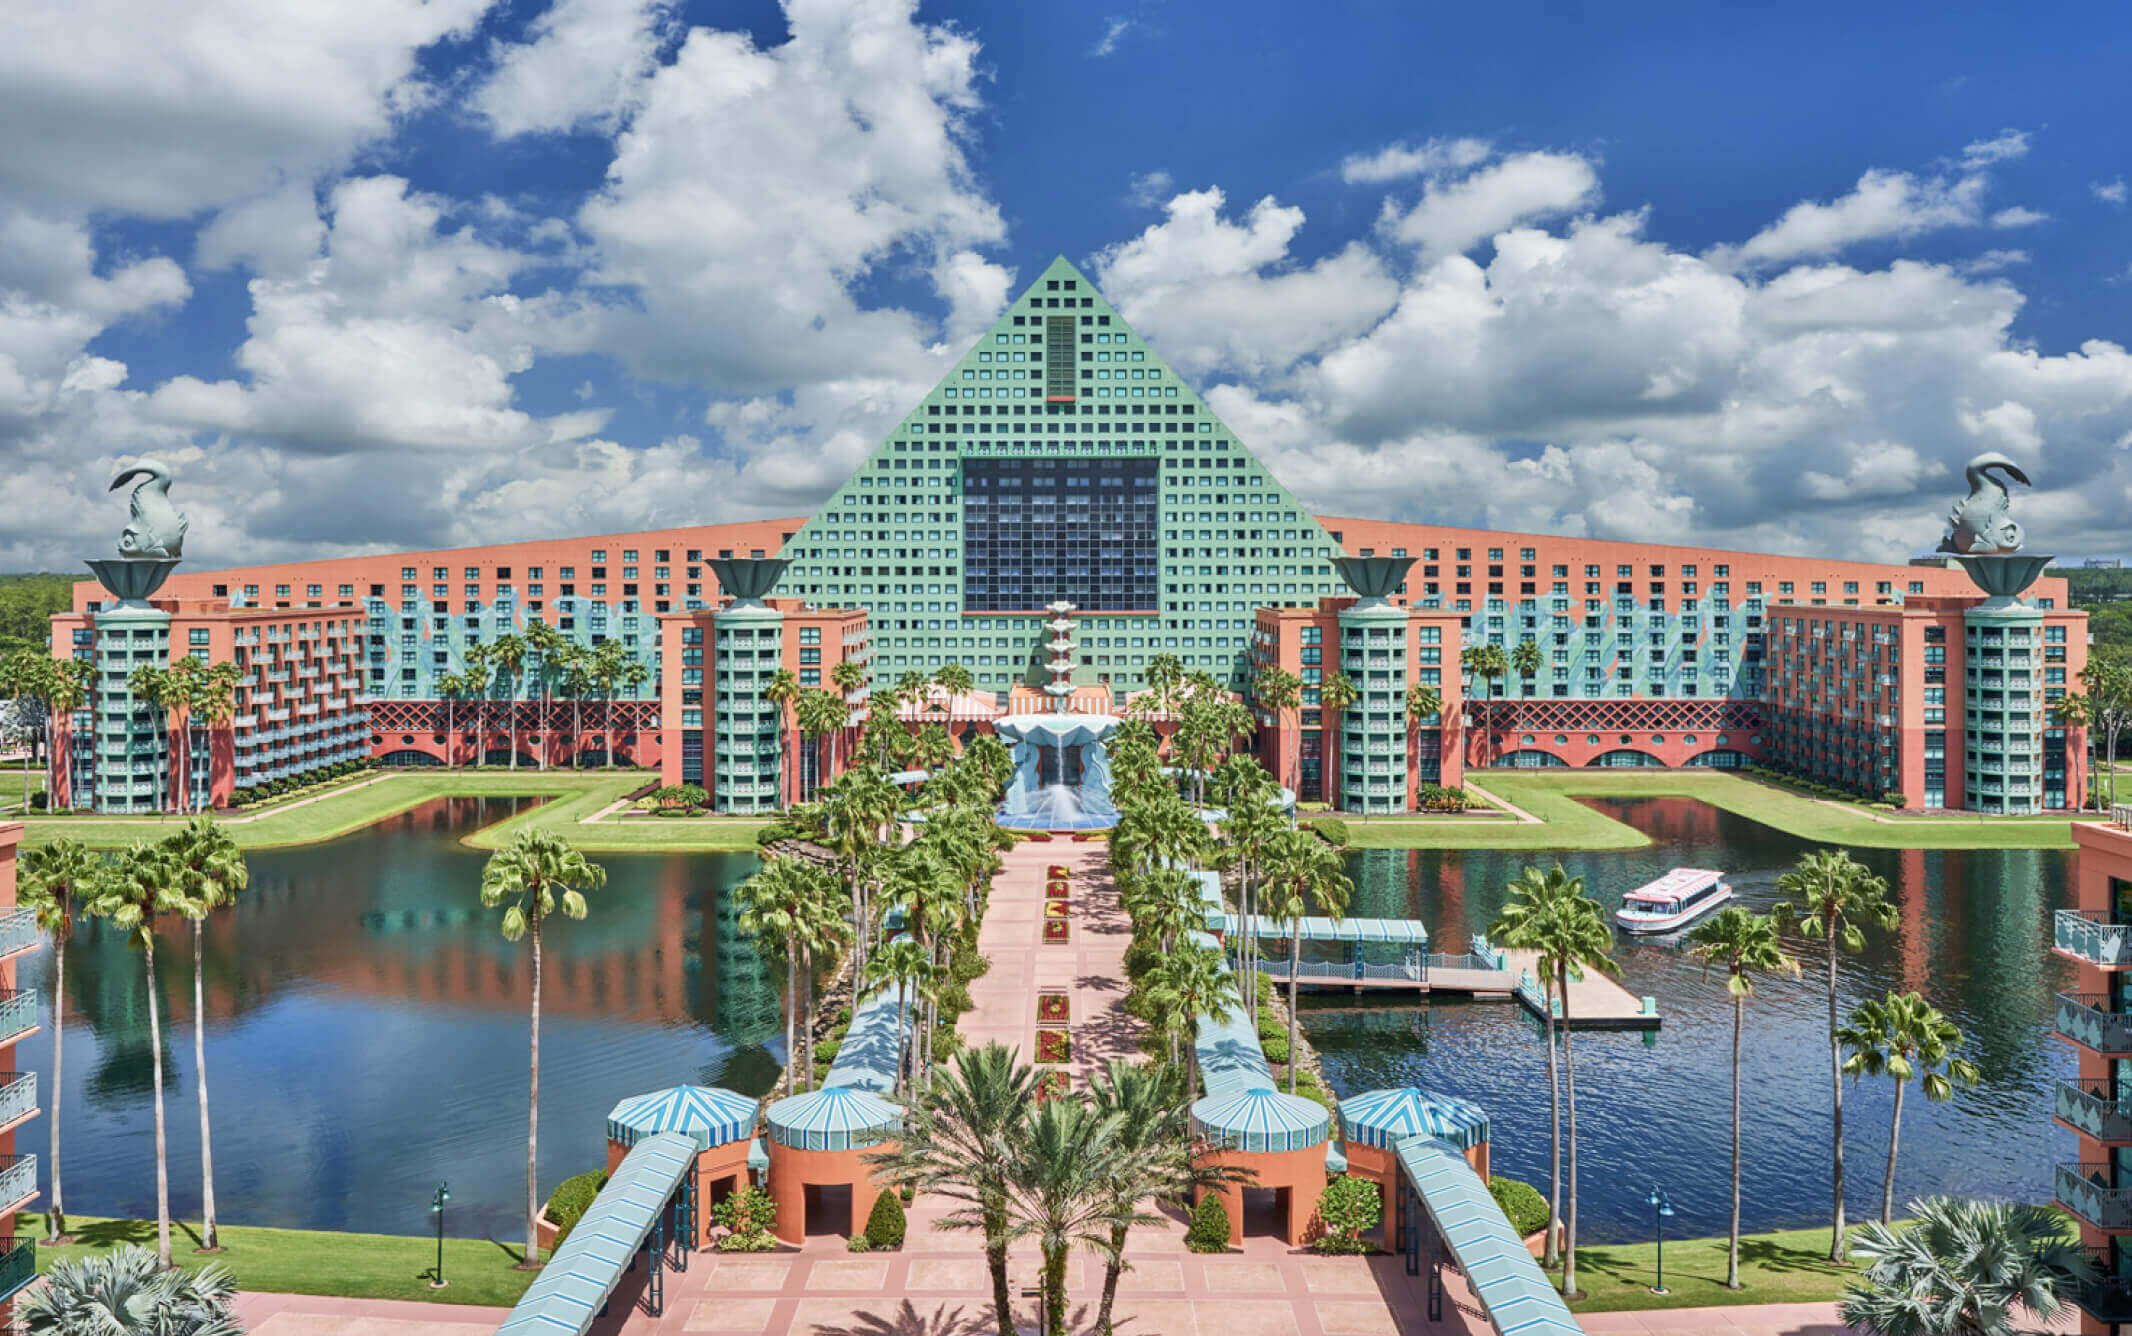 The exuberant Walt Disney World Dolphin Hotel has a bright modern architecture and is surrounded by a lake 